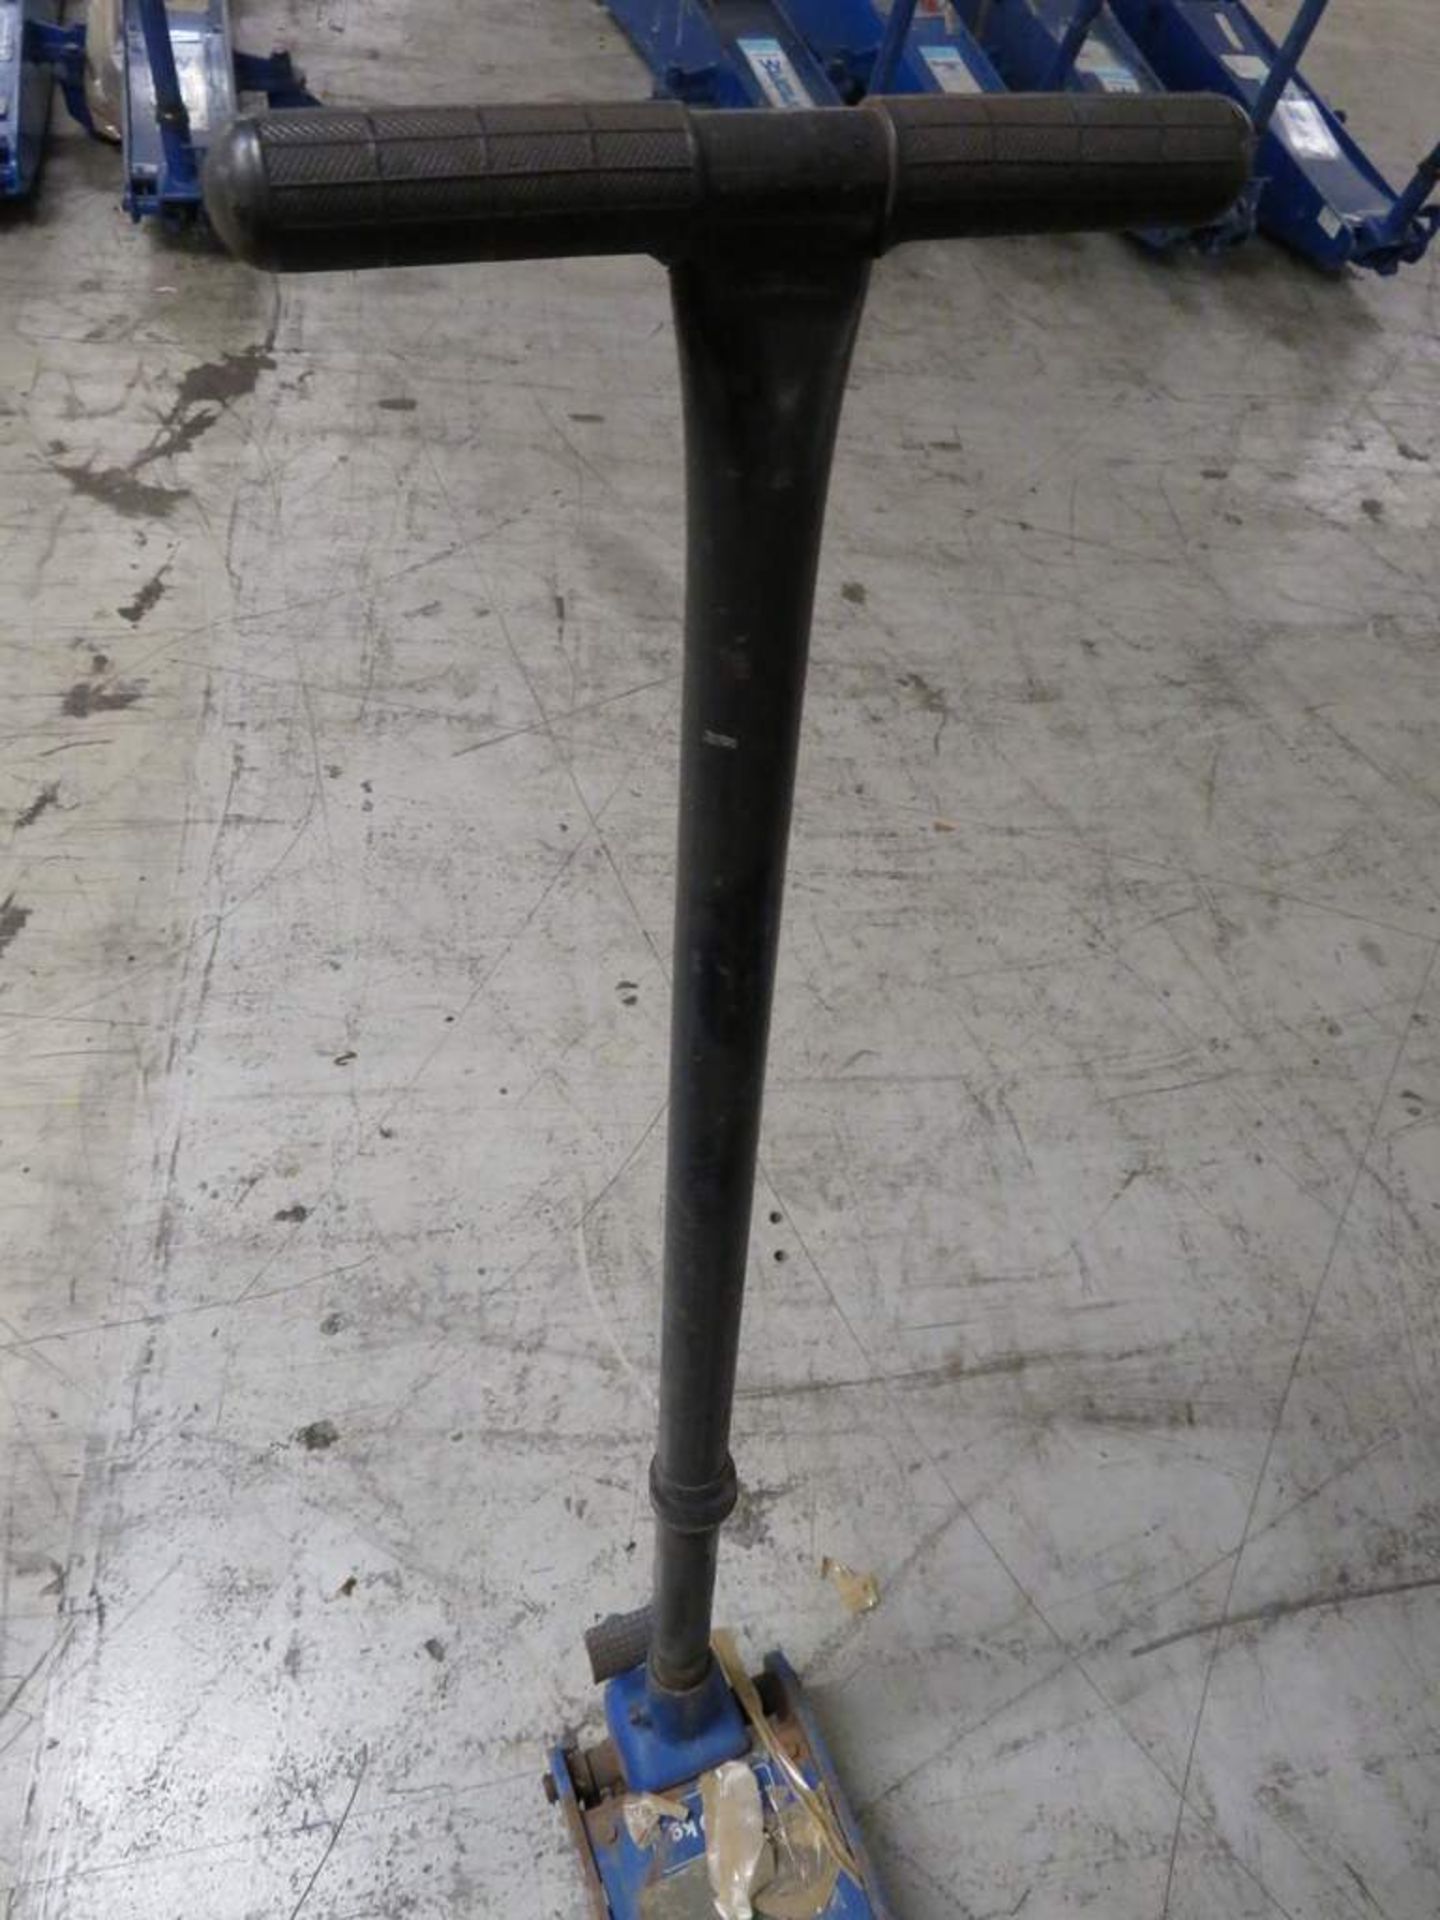 Weber 10 Tonne Vehicle Trolley Jack Complete With Handle - WDK100LQ - Working Condition - Image 6 of 7